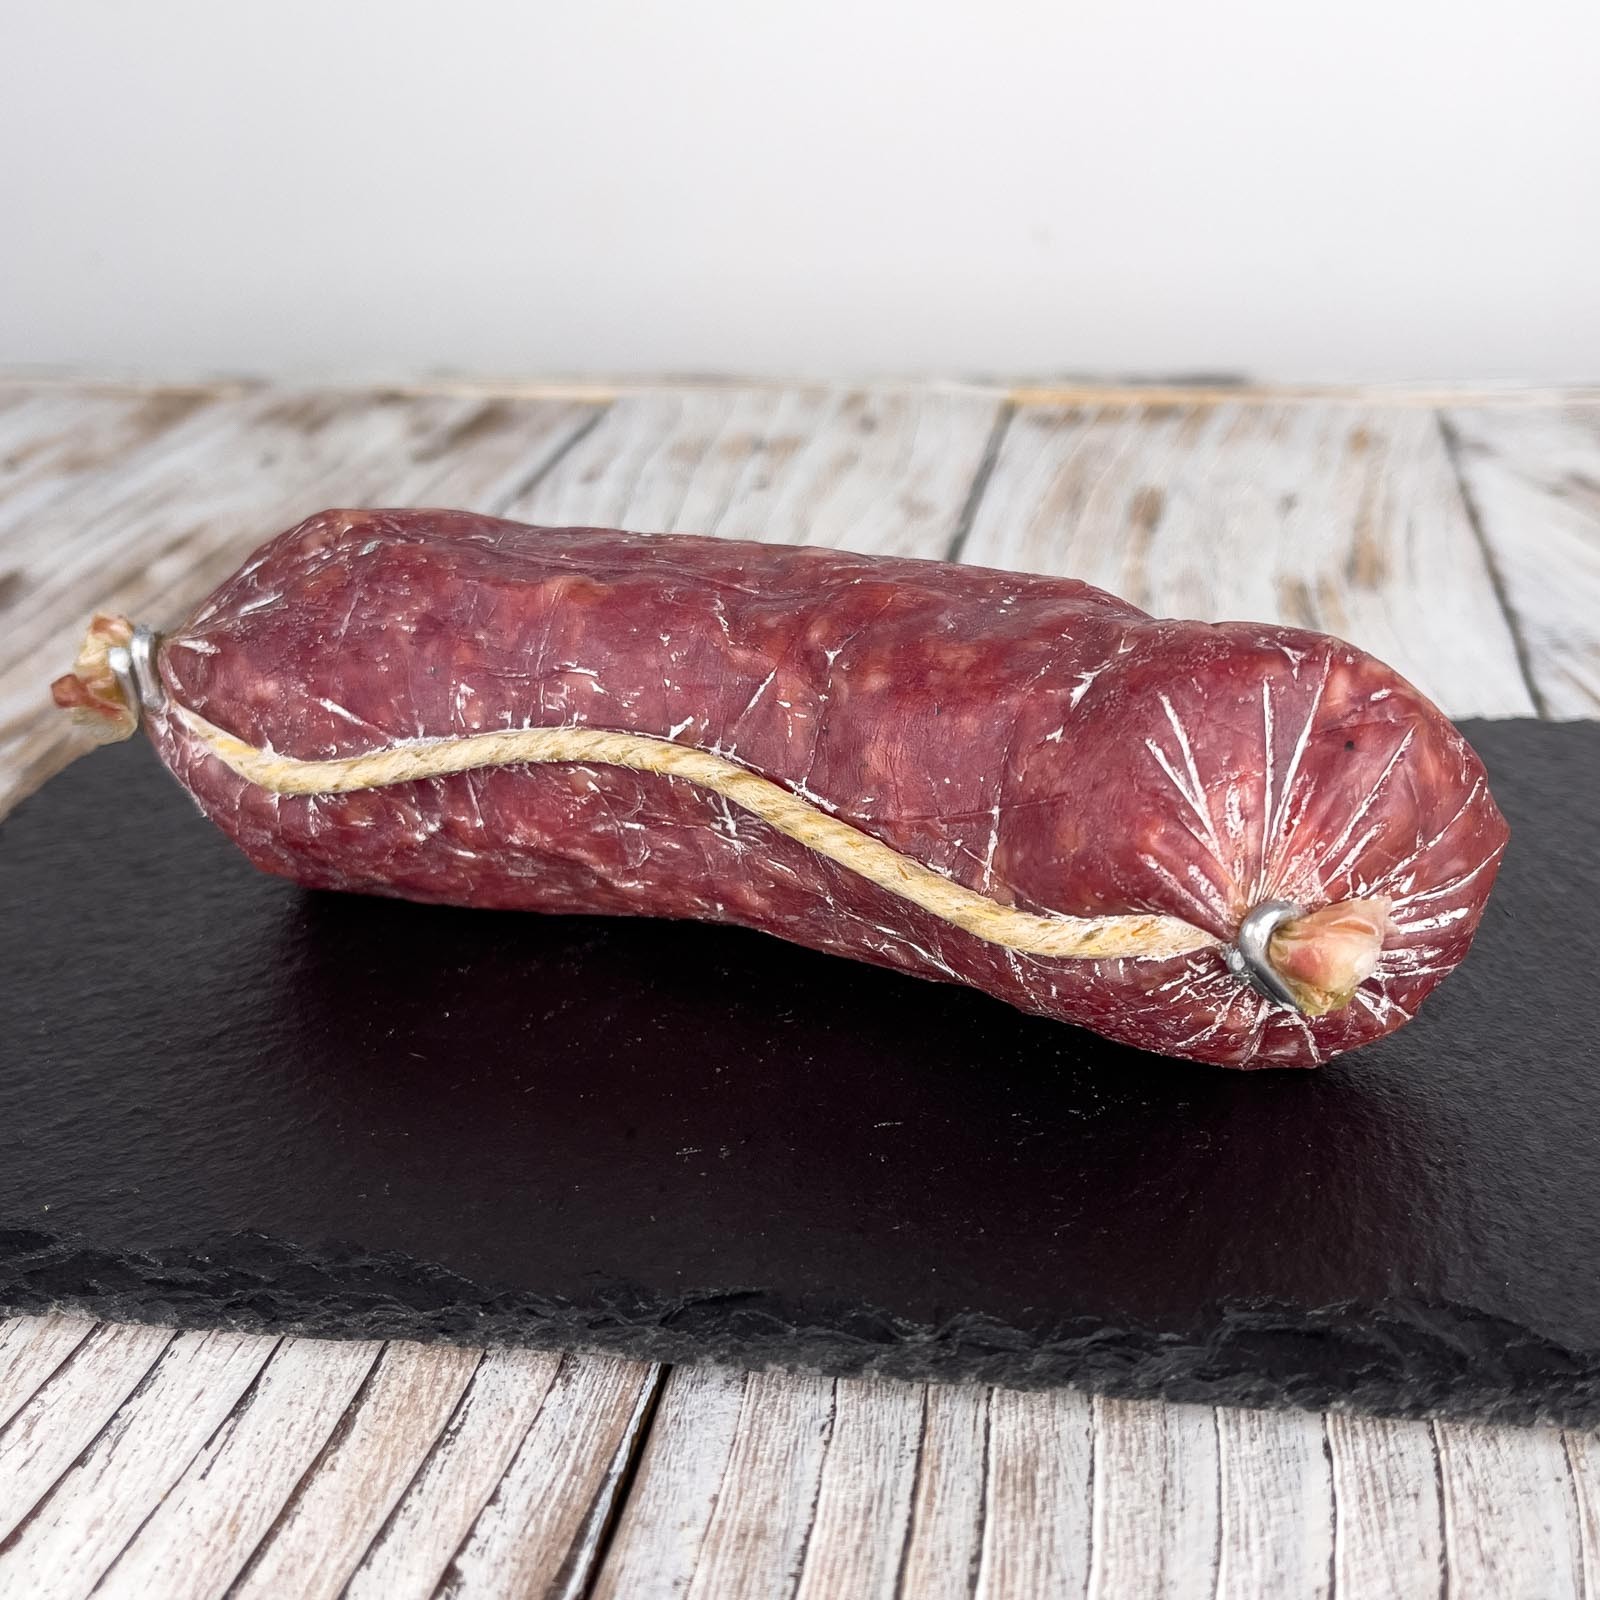 Garlic Salami is a traditional medium-ground artisan salami flavored with garlic, stuffed into natural pork casing, tied by hand and seasoned naturally.